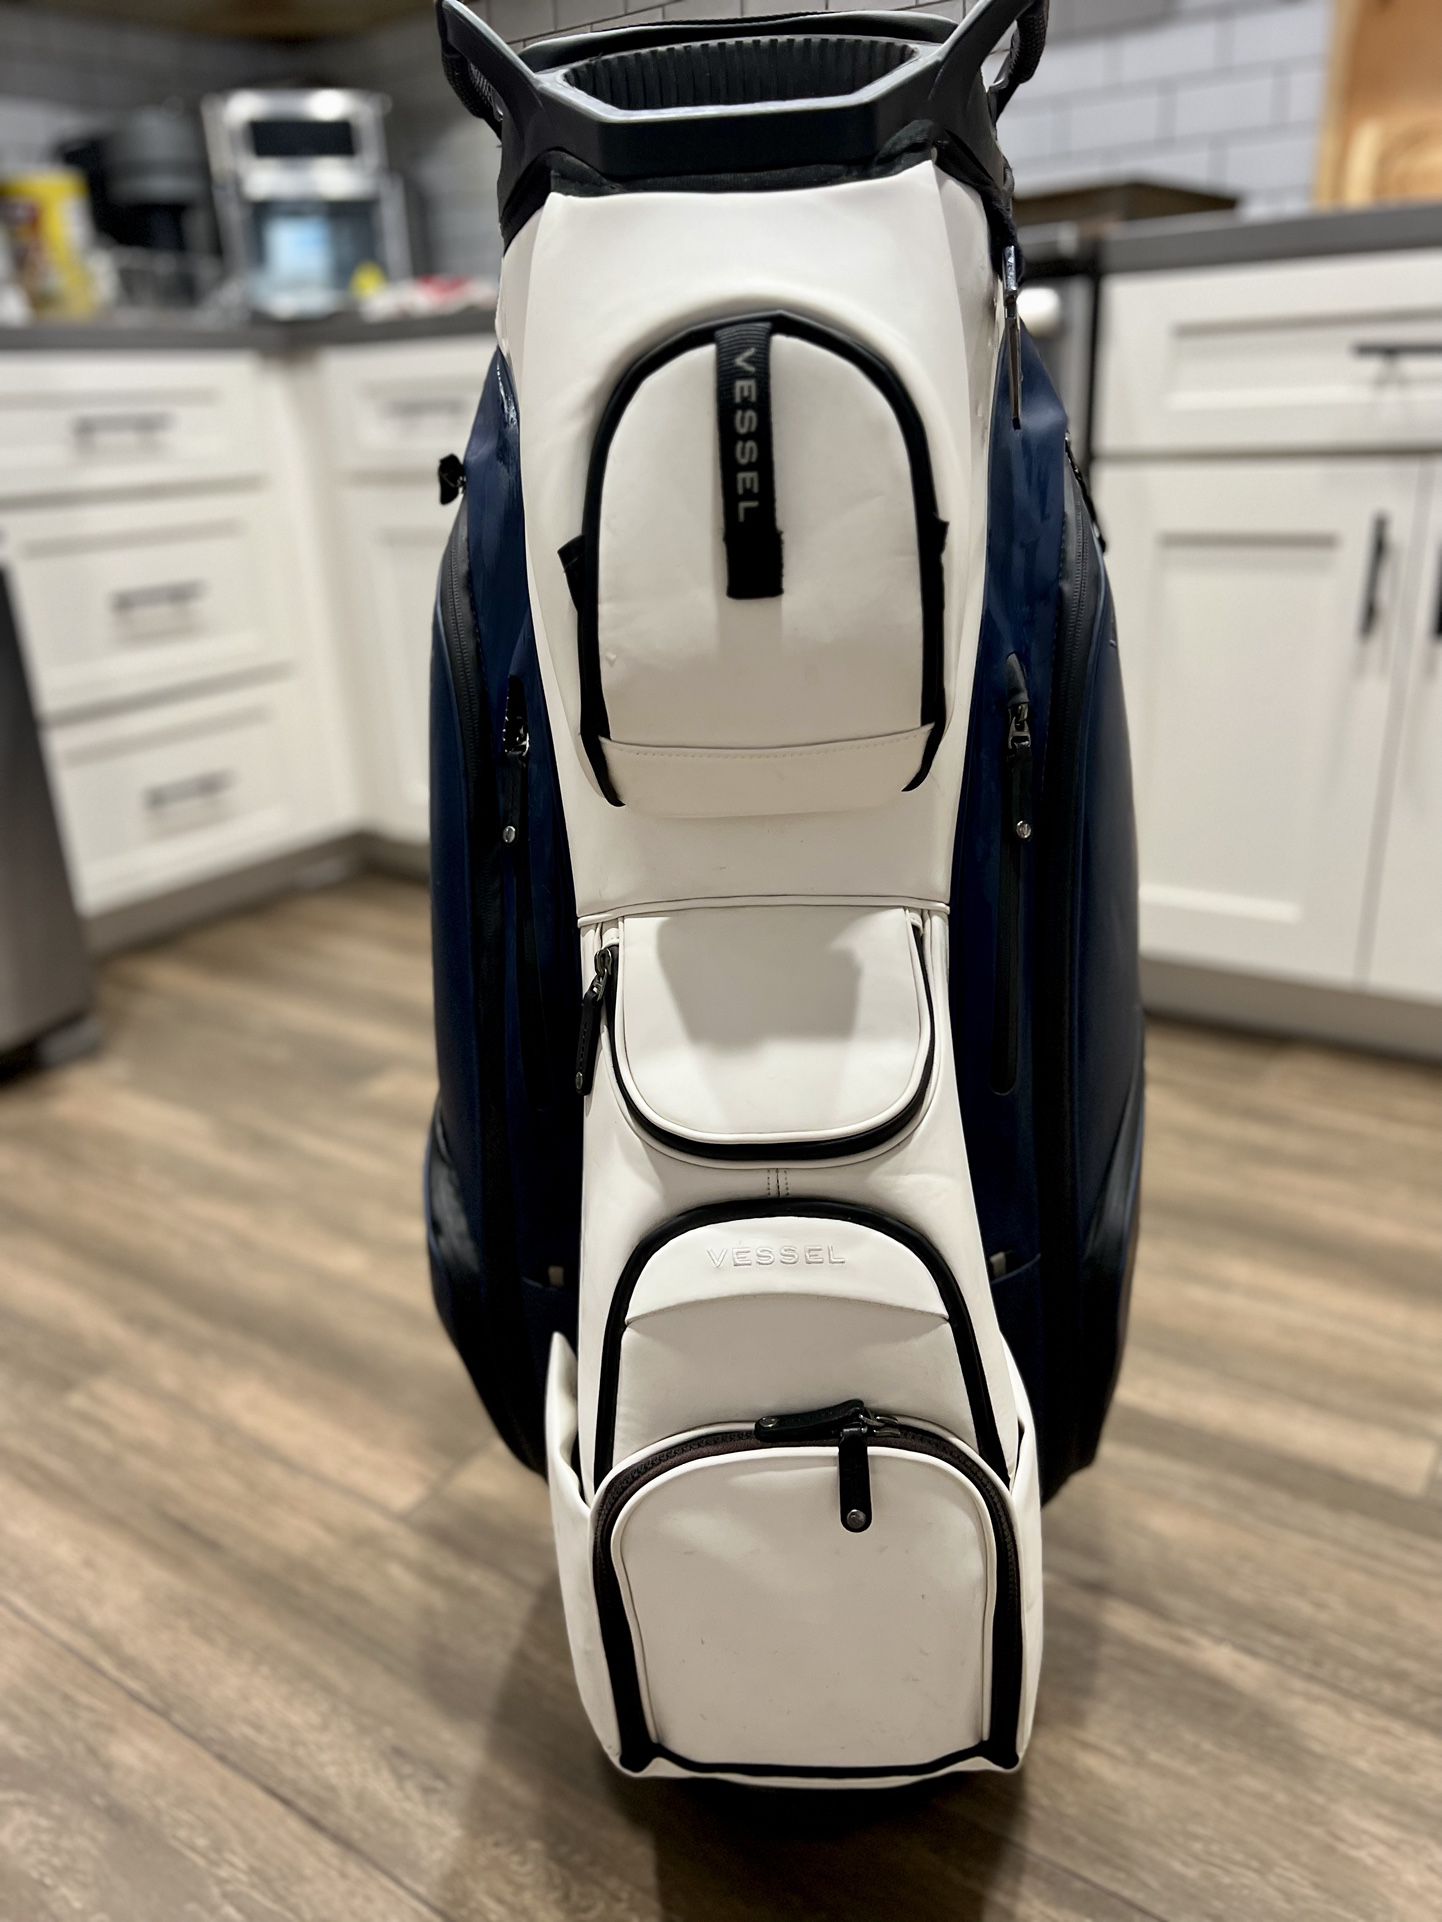 Vessel 2022 Lux XV Cart Golf Bag for Sale in Moreno Valley, CA